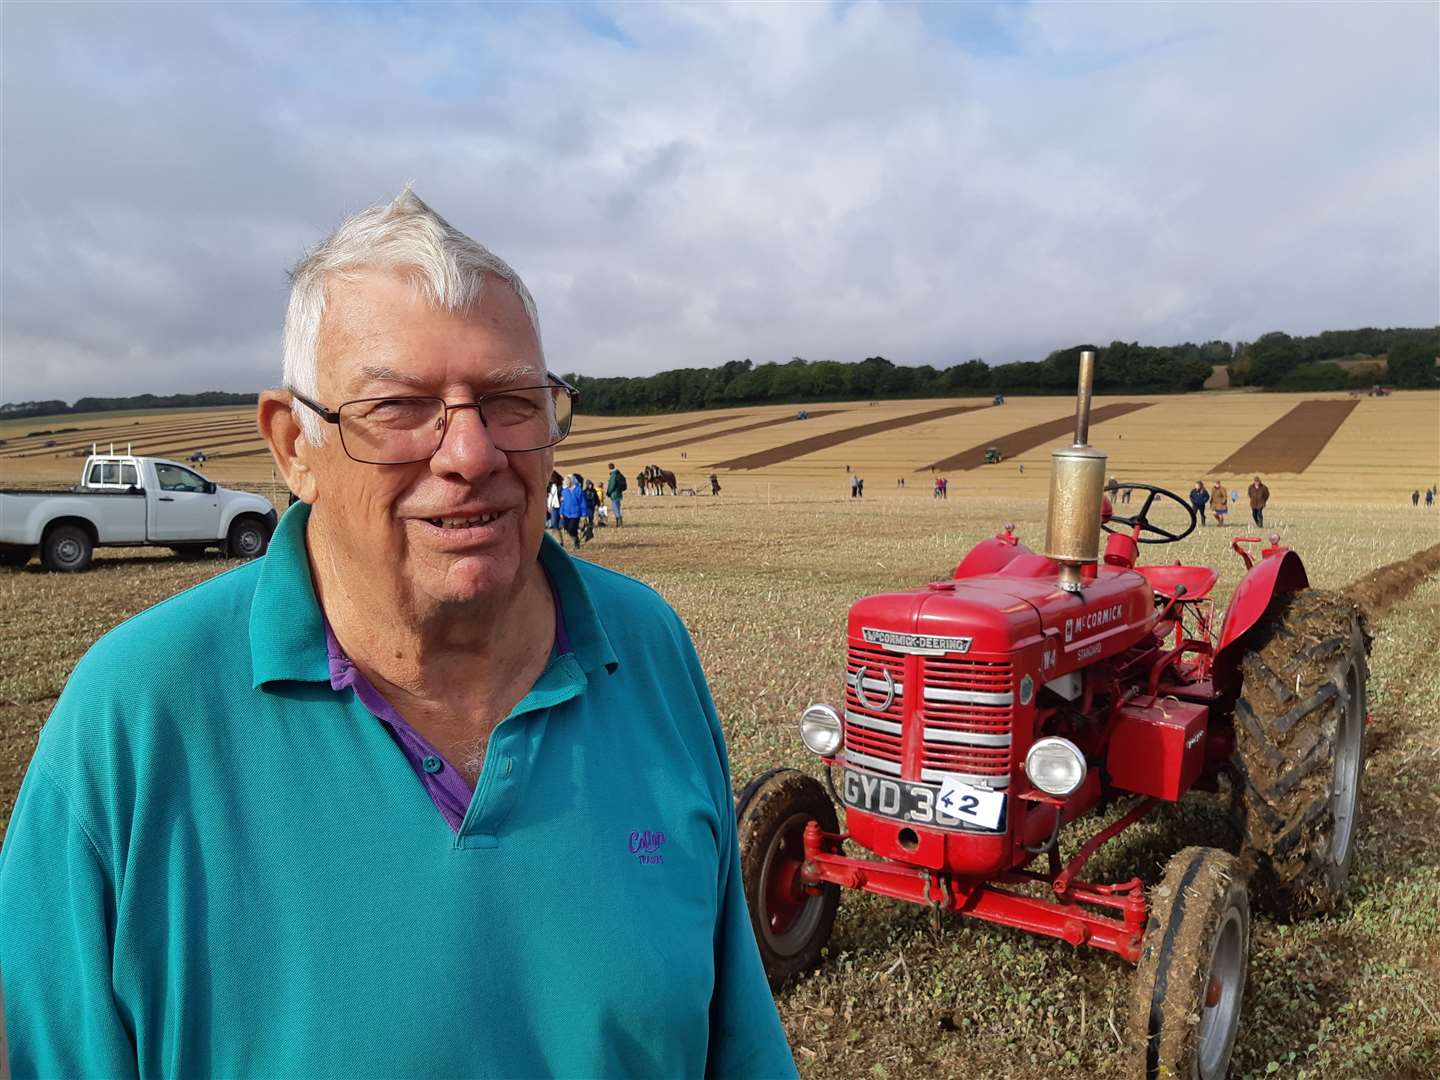 Contestant John McPherson with his 1942 tractor